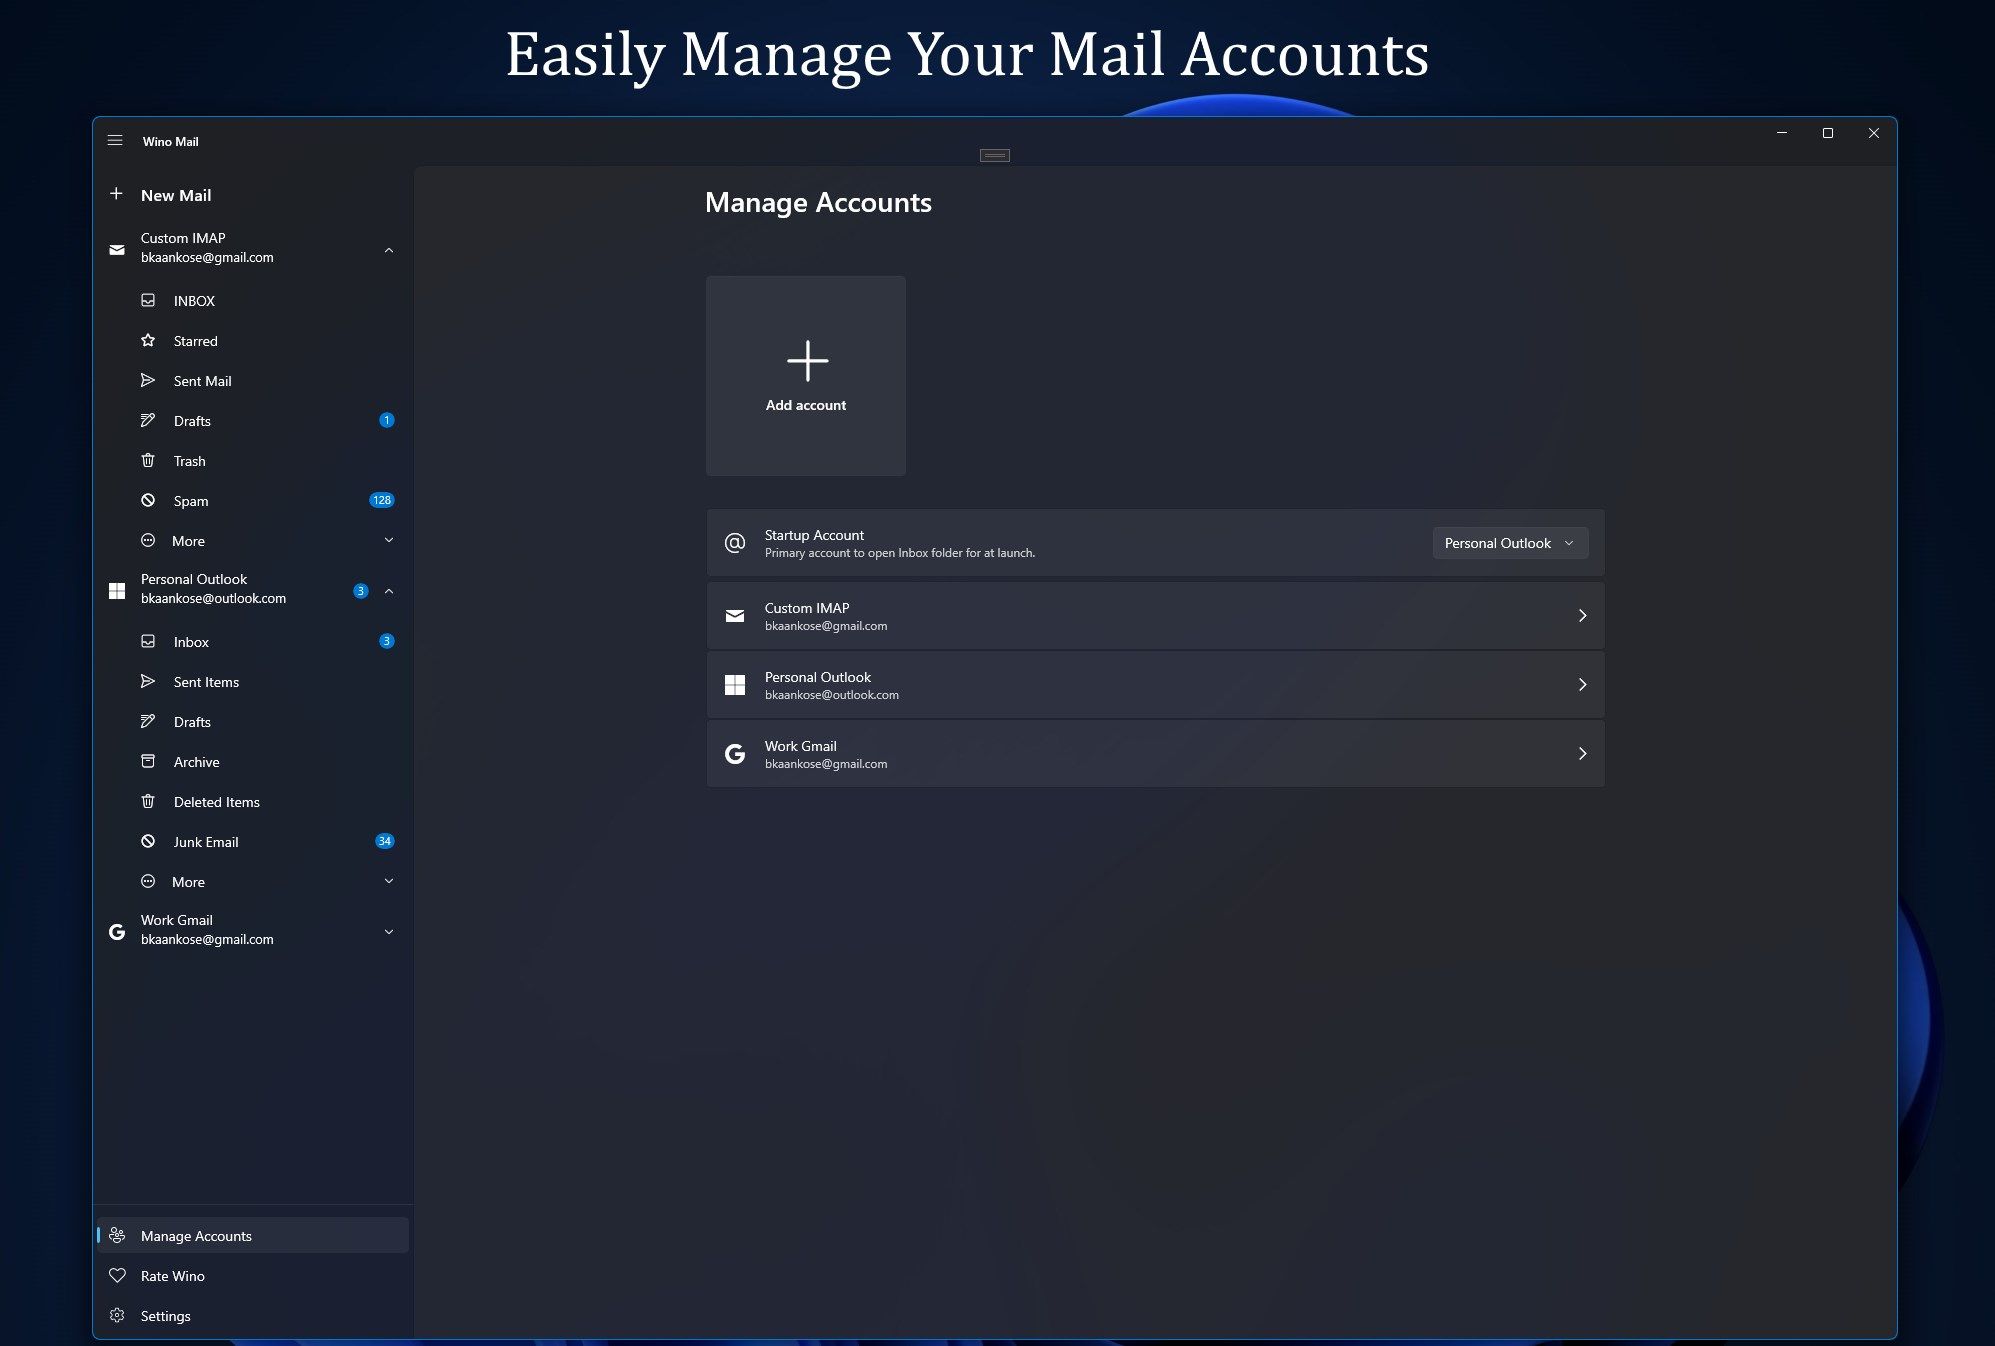 Manage all your mail accounts with ease.